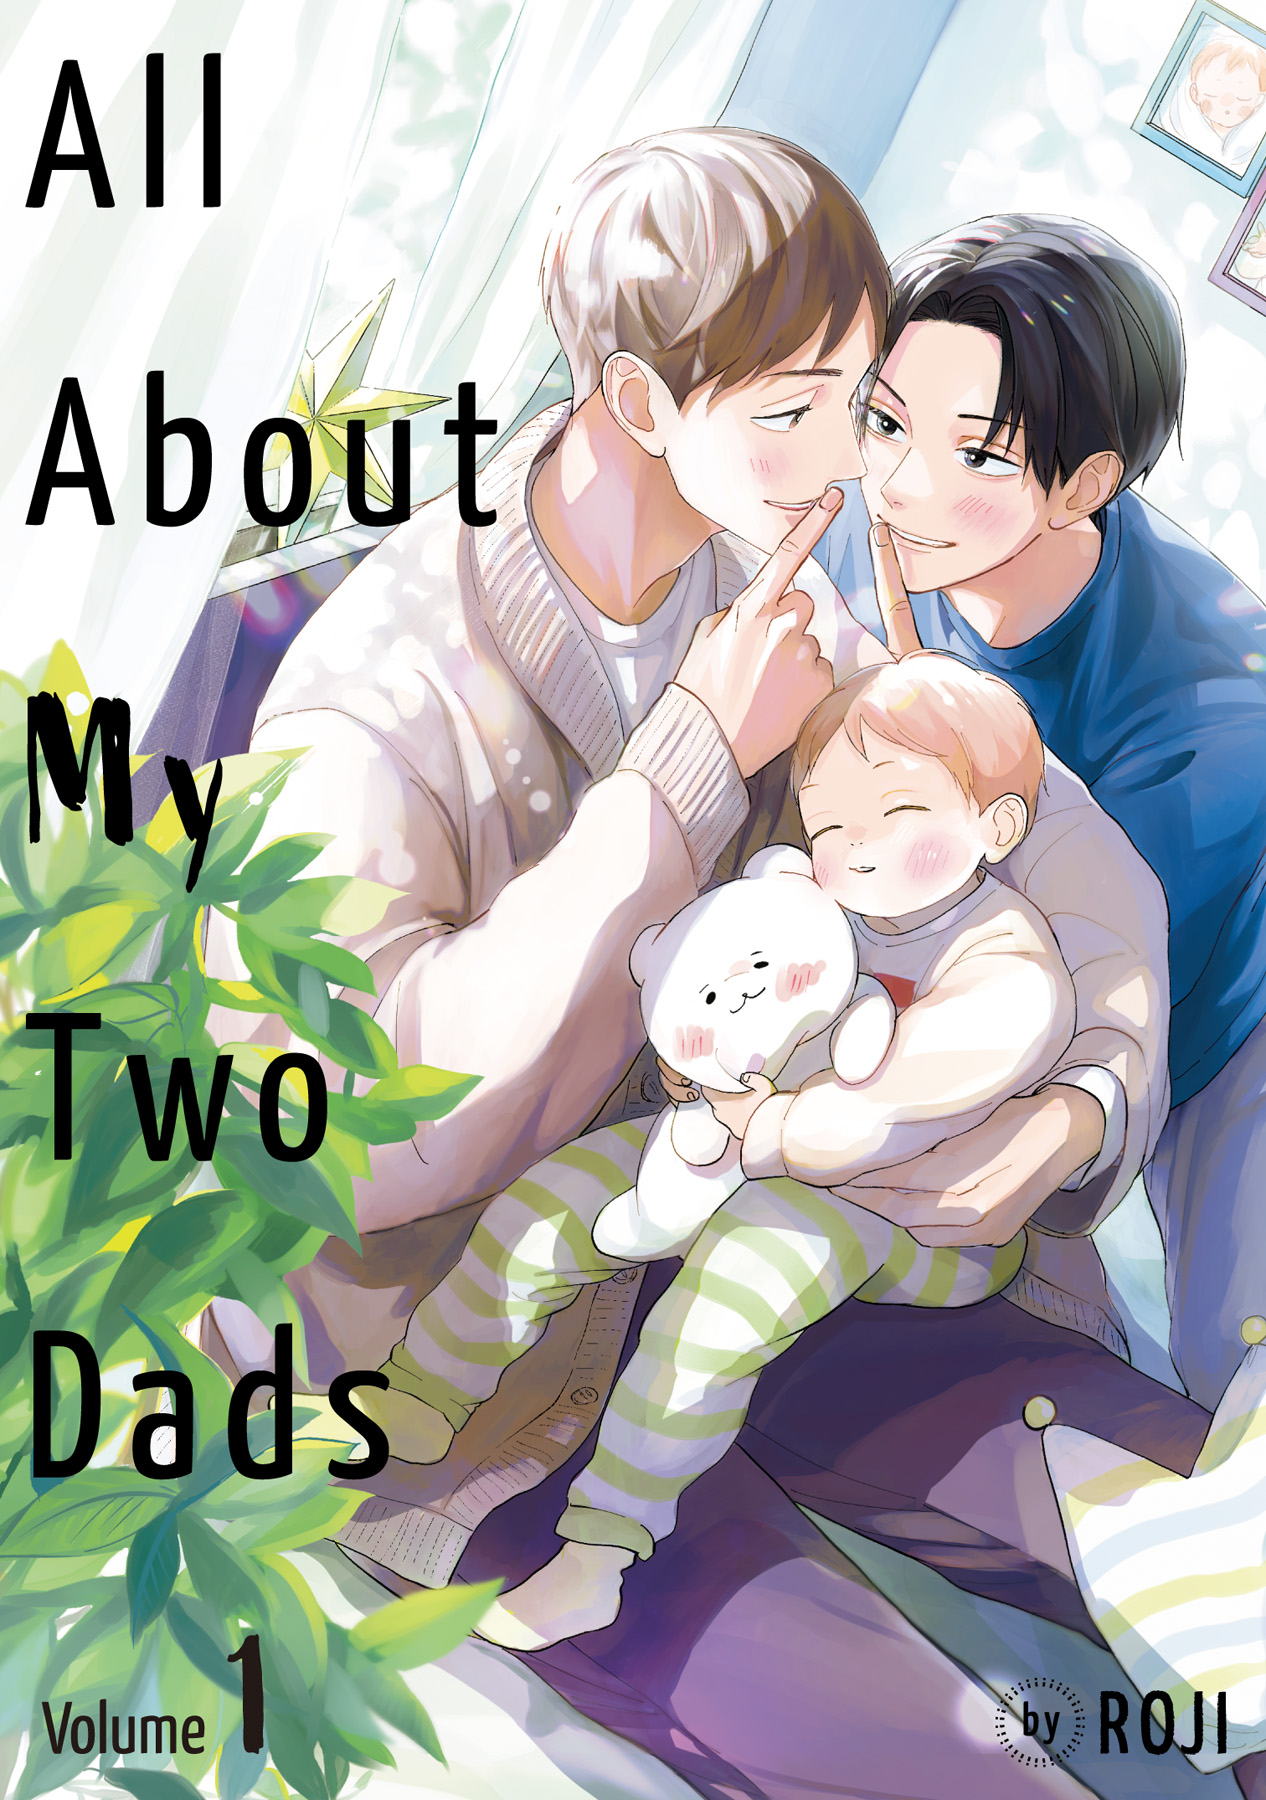 Roji's "All About My Two Dads" (Happy Father's Day!)